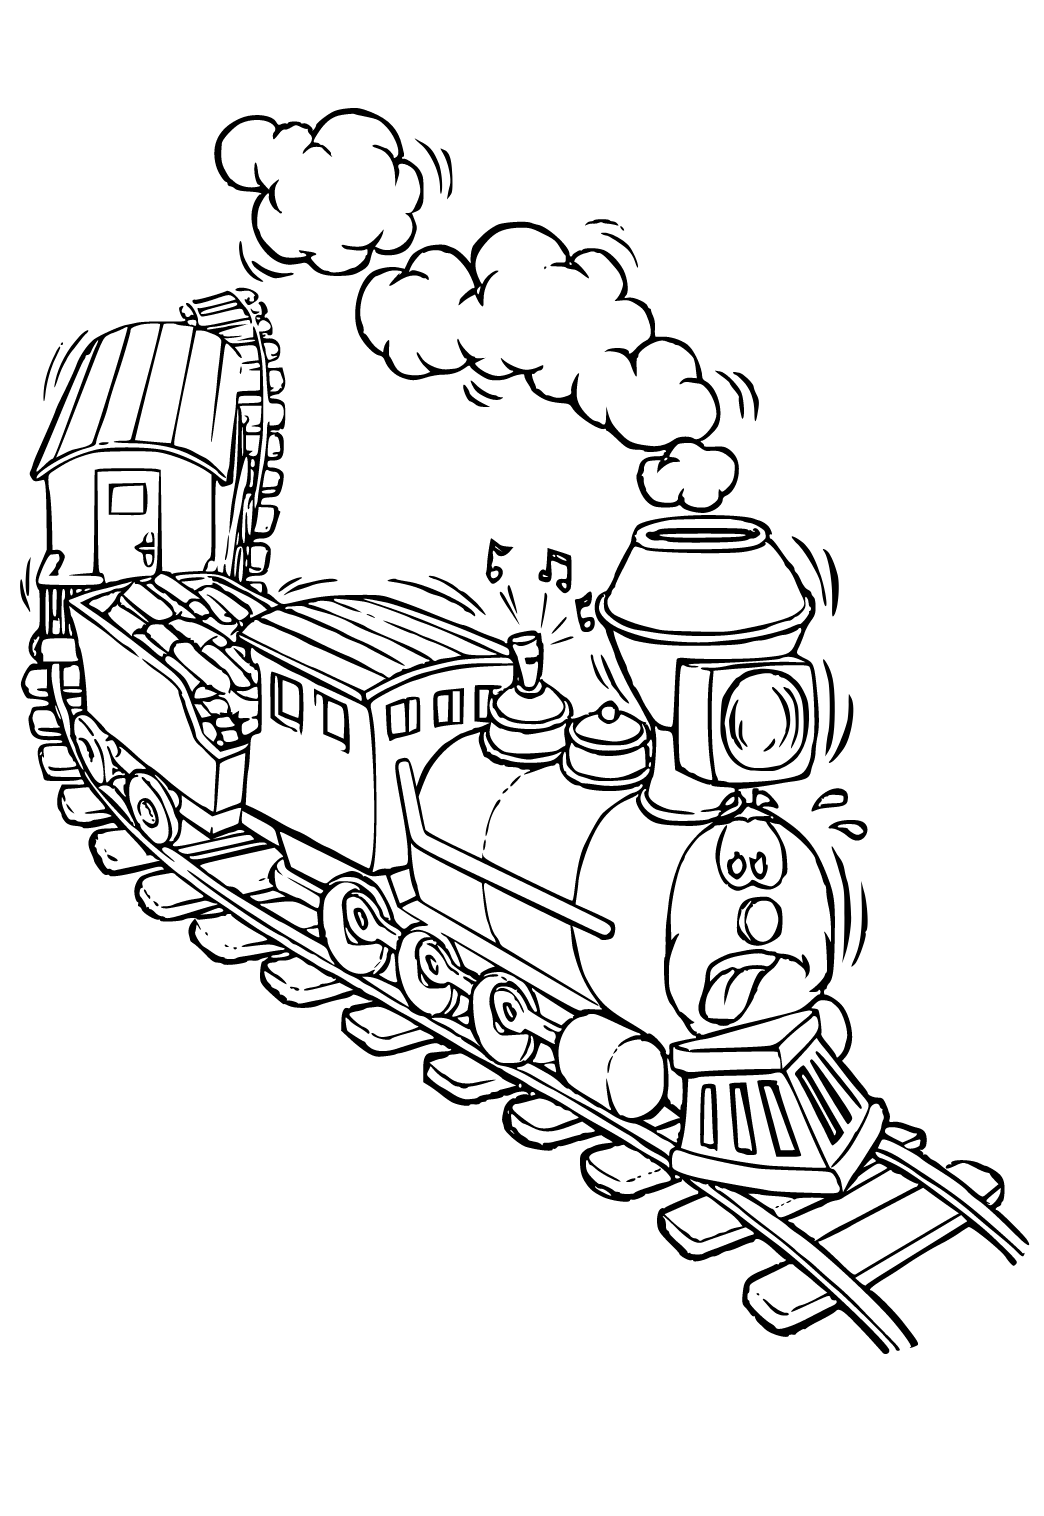 Free printable polar express funny coloring page for adults and kids